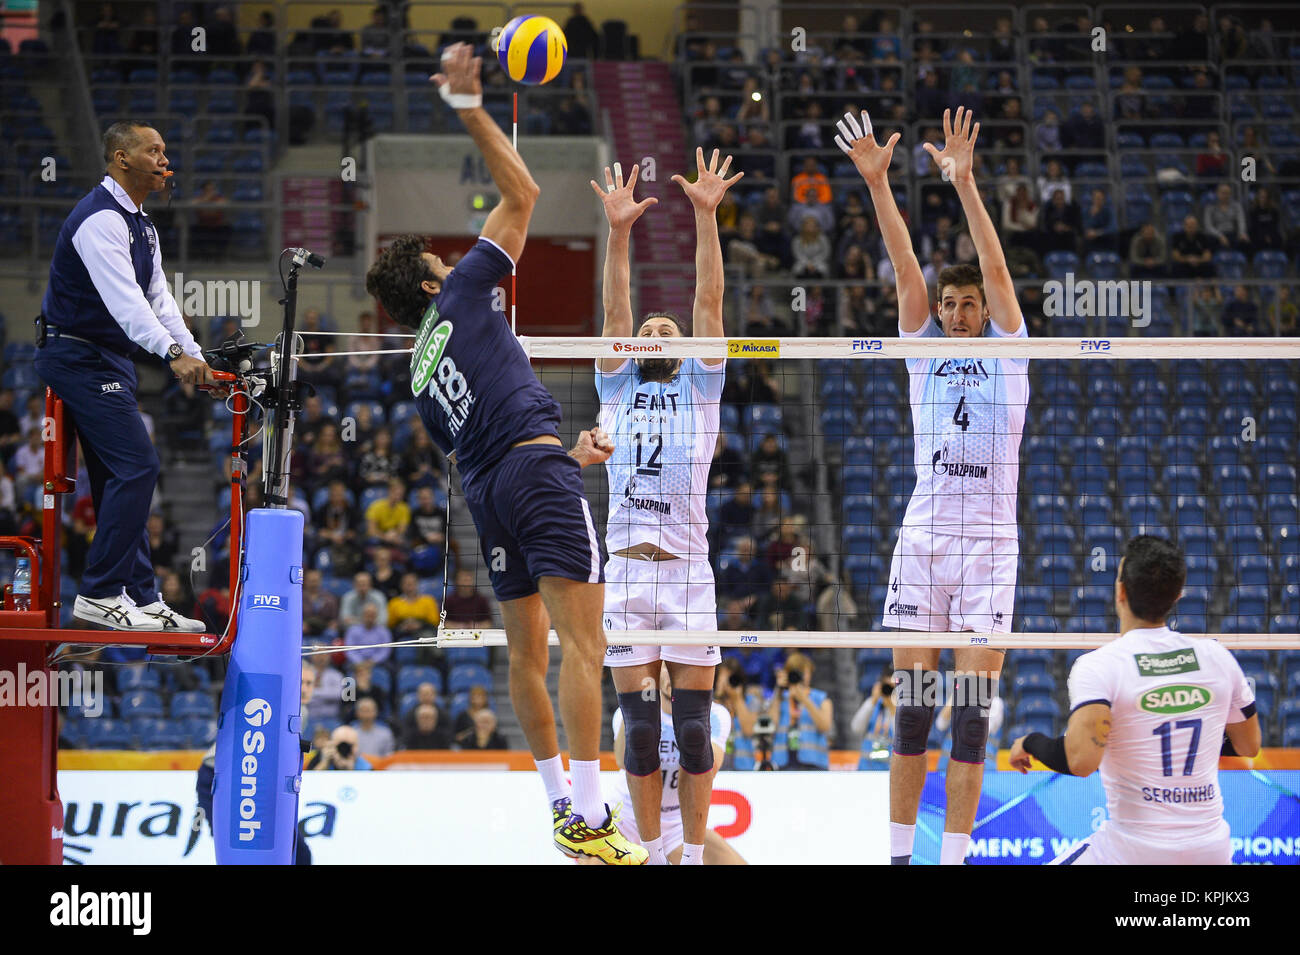 Krakow, Poland. 16th Dec, 2017. Filipe Ferraz (19) of Sada Cruzeiro in action against and Alexander Butko (12) and Artem Volvich (4) of VC Zenit Kazan during the match between Sada Cruzeiro Volei and VC Zenit kazan during the semi finals of Volleyball Men's Club World Championship 2017 in Tauron Arena. Credit: Omar Marques/SOPA/ZUMA Wire/Alamy Live News Stock Photo